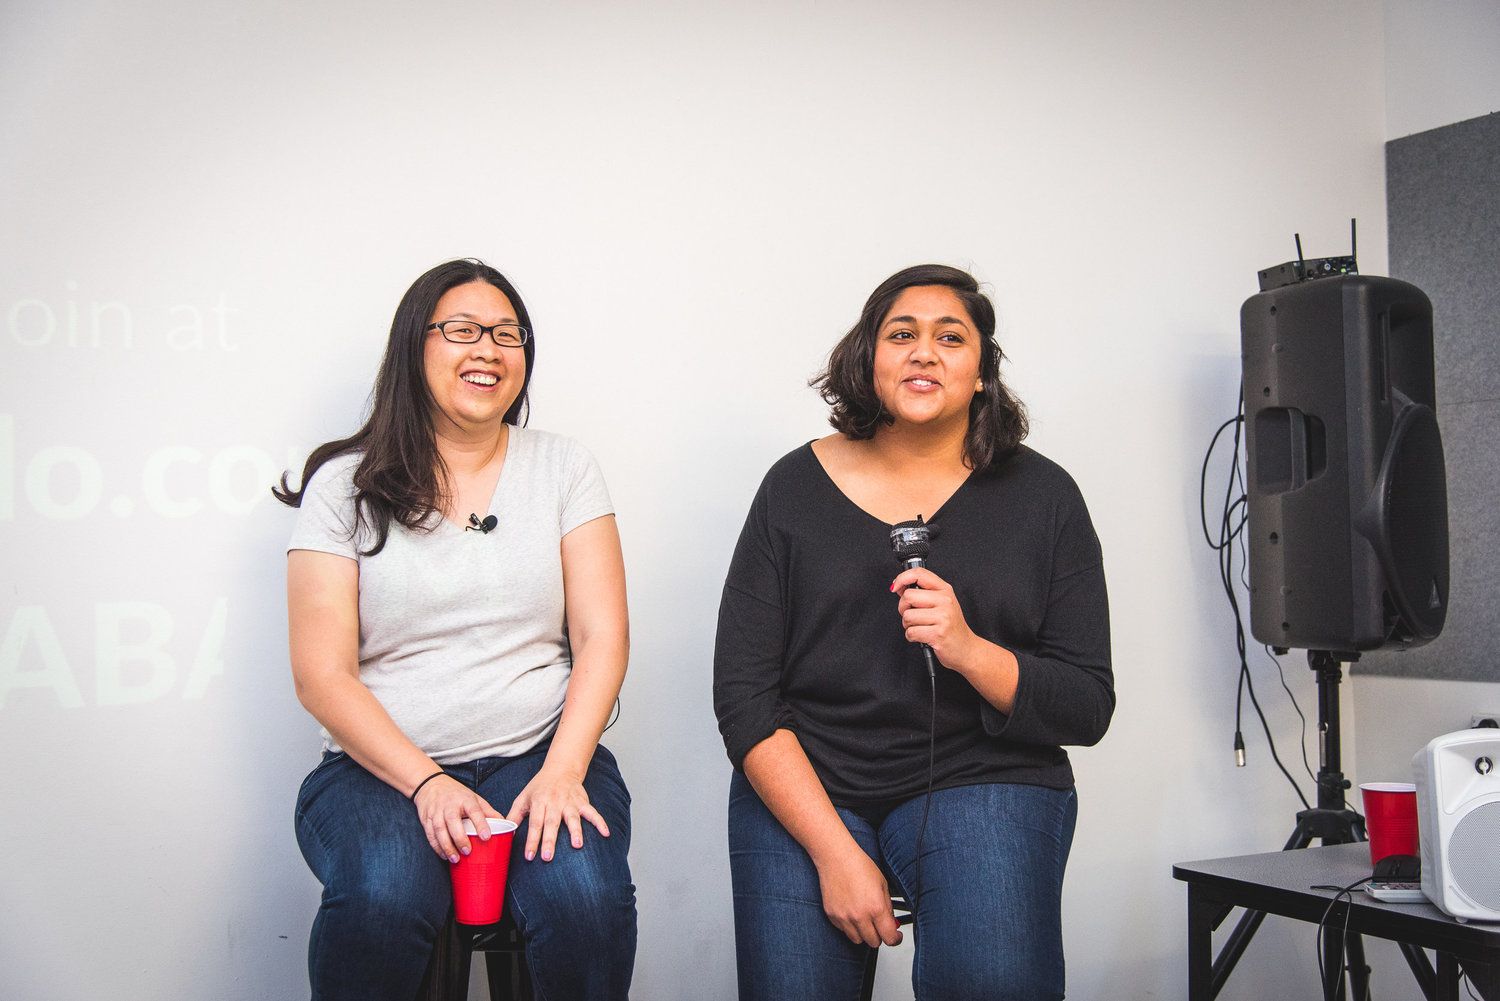 Silicon Valley Founders Holly Liu and Shruti Shah share their startup stories